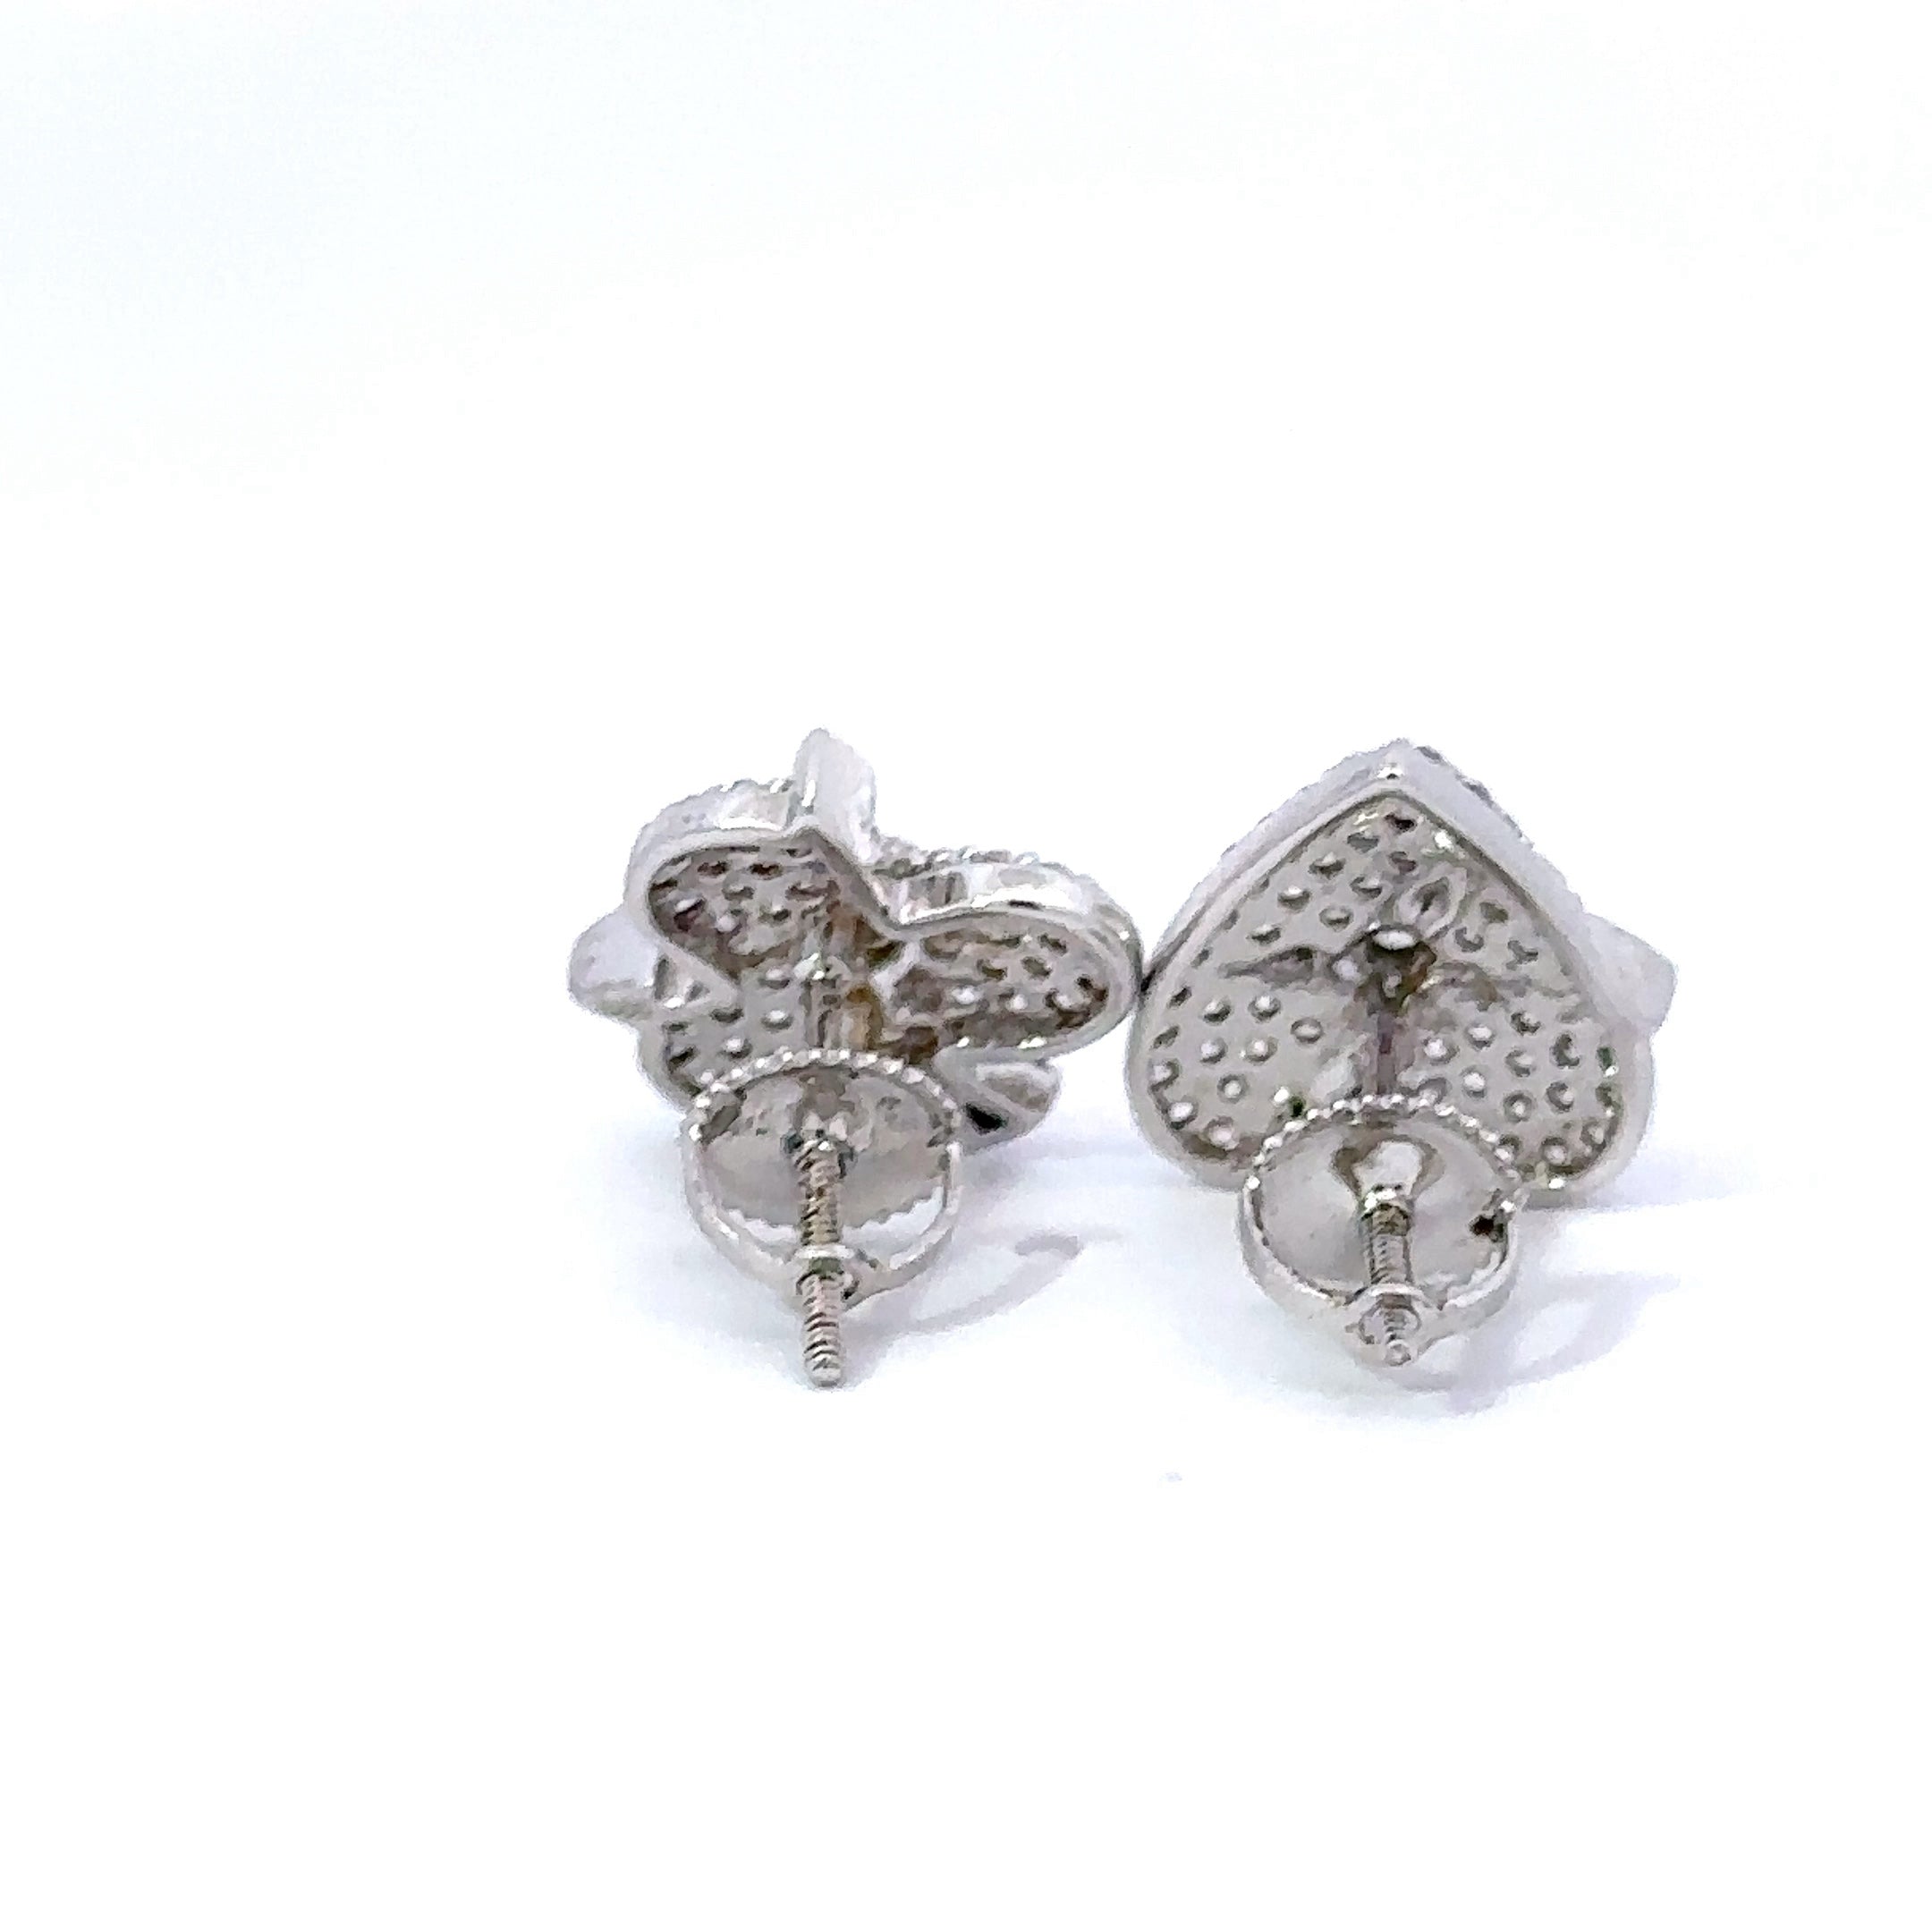 AZURIAN 925 CZ RHODIUM ICED OUT EARRINGS | 9219951